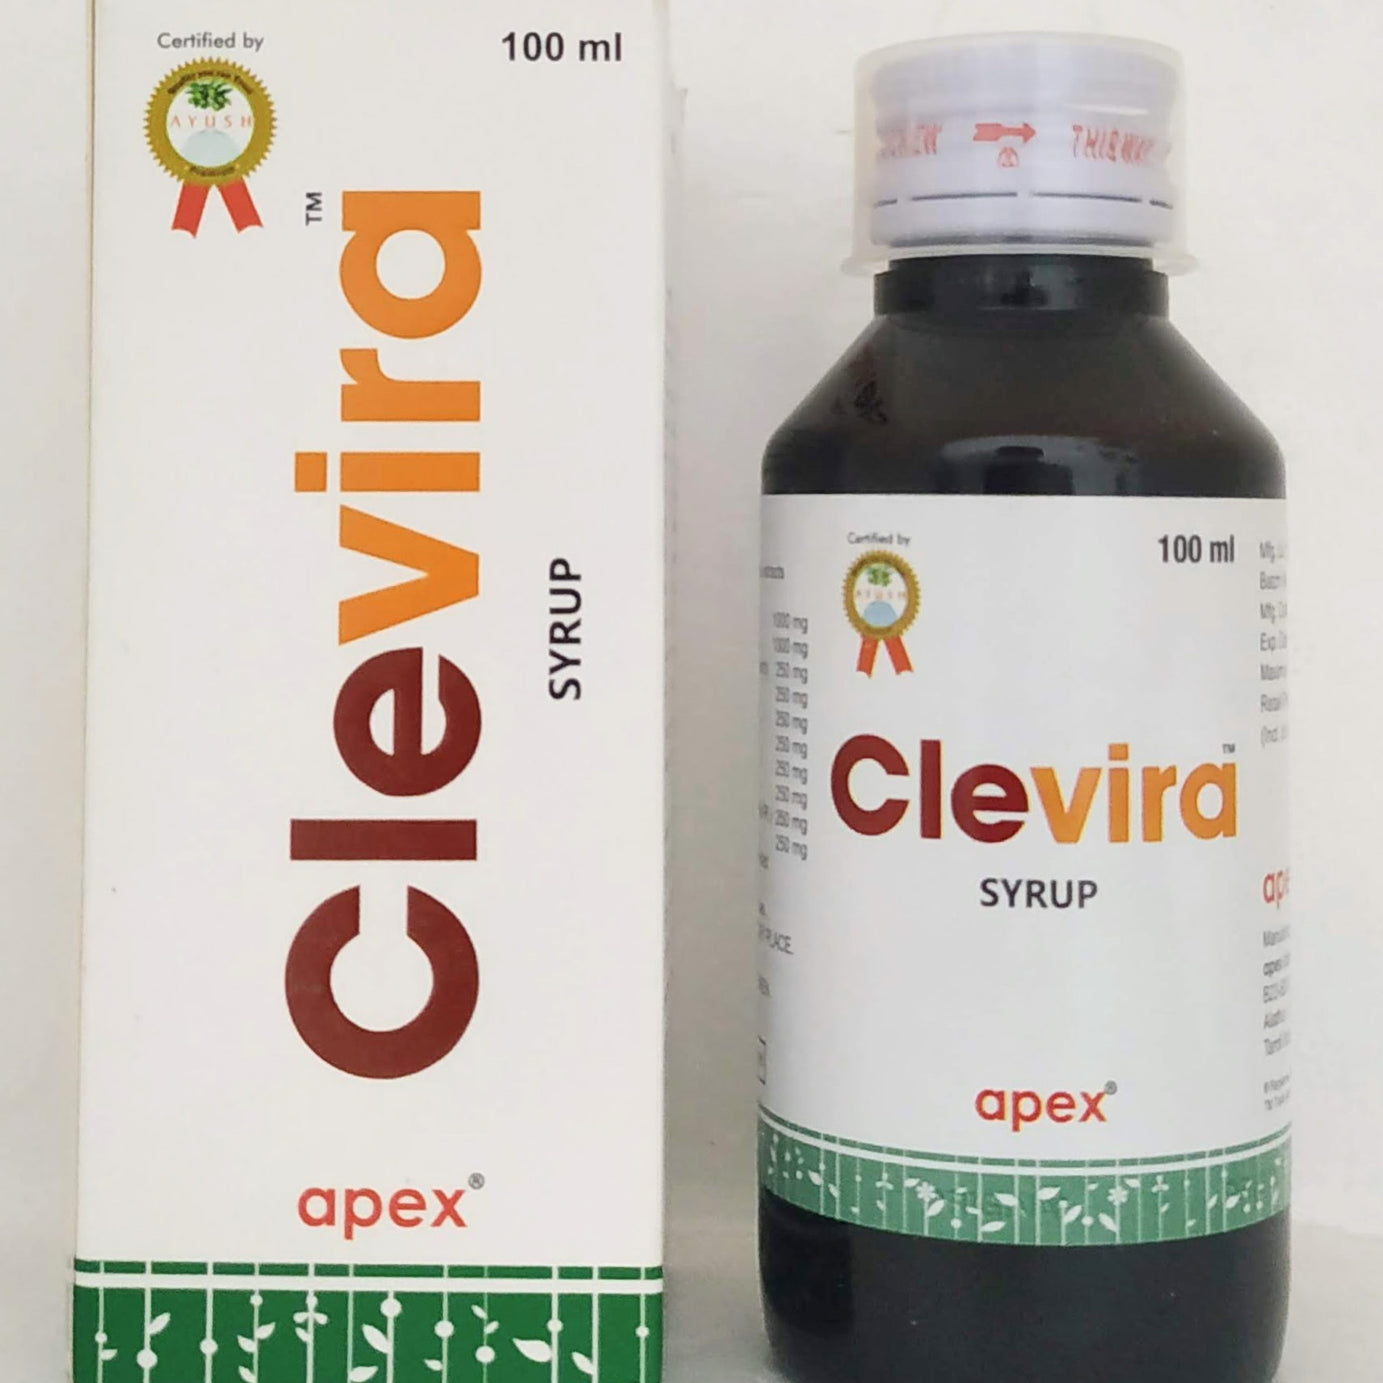 Shop Clevira Syrup 100ml at price 125.00 from Apex Ayurveda Online - Ayush Care